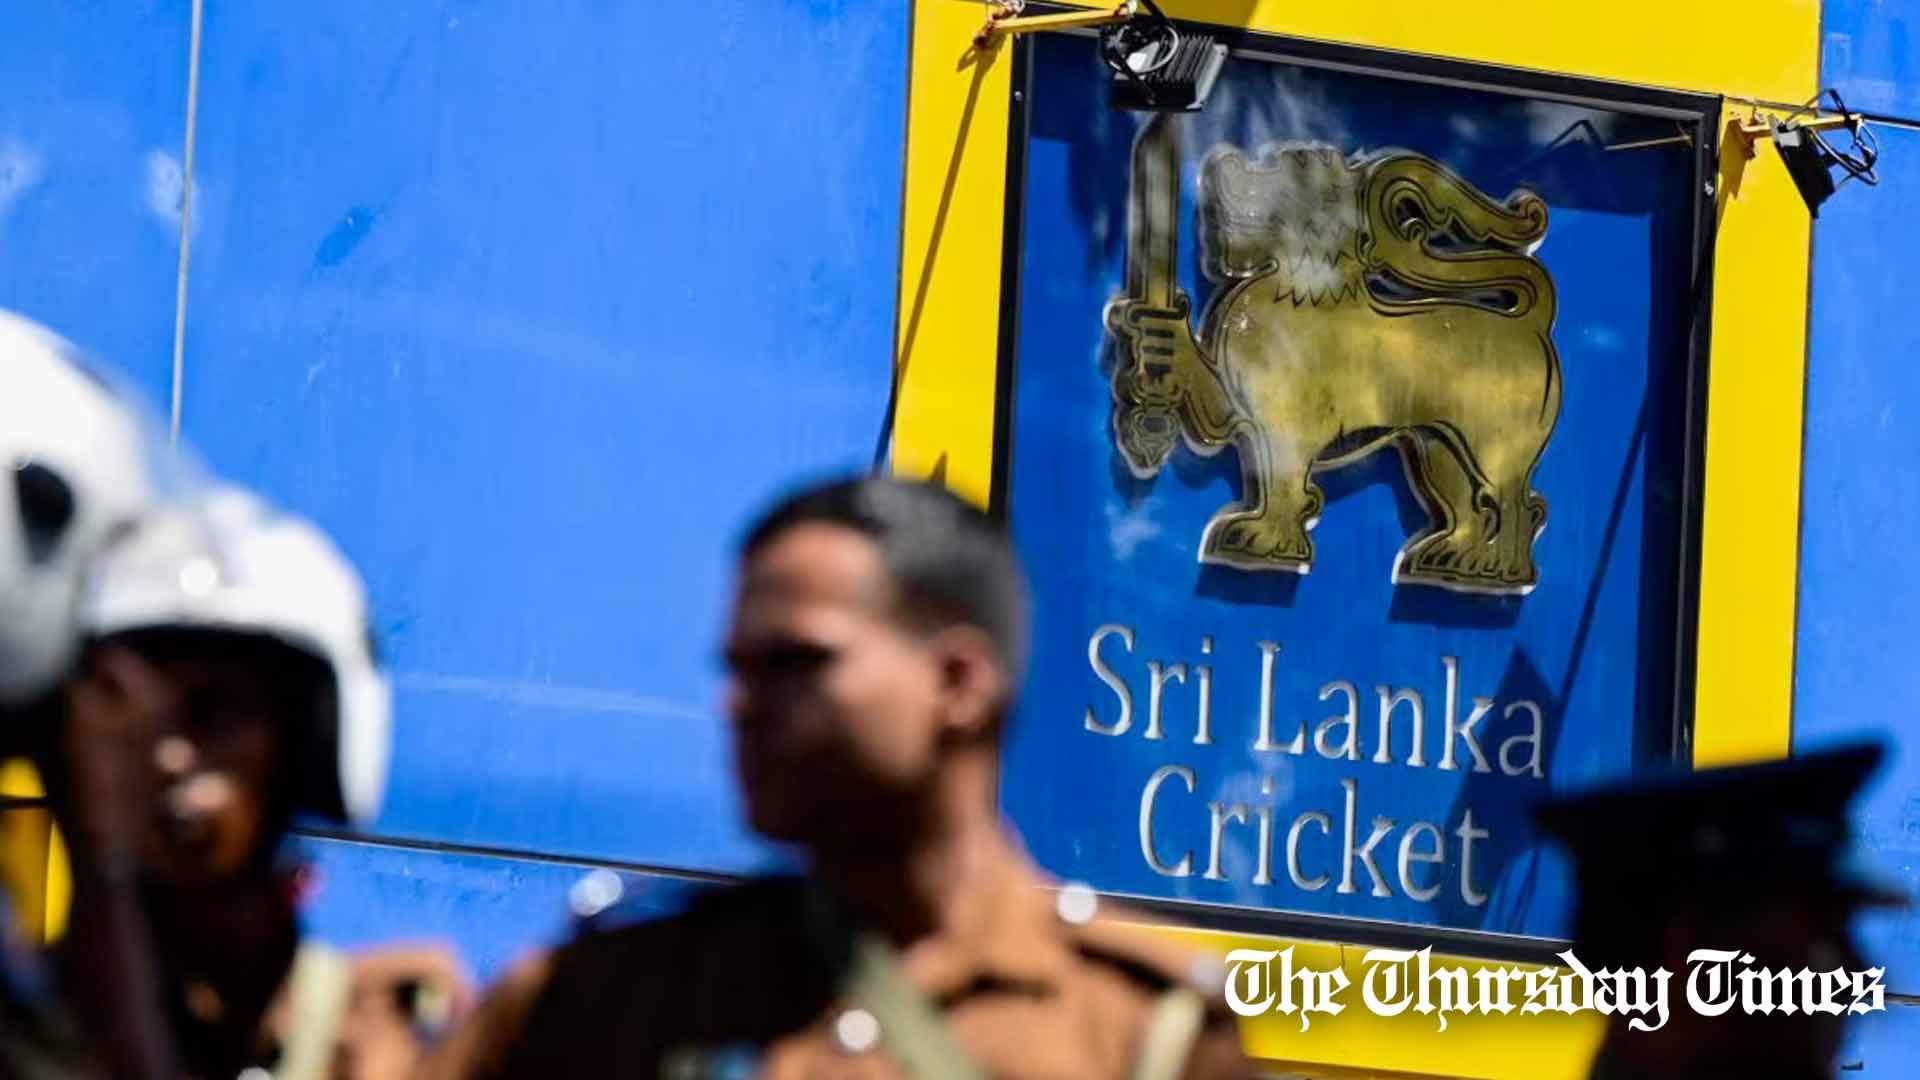 A file photo is shown of a Sri Lankan Cricket emblem at Colombo. — FILE/THE THURSDAY TIMES